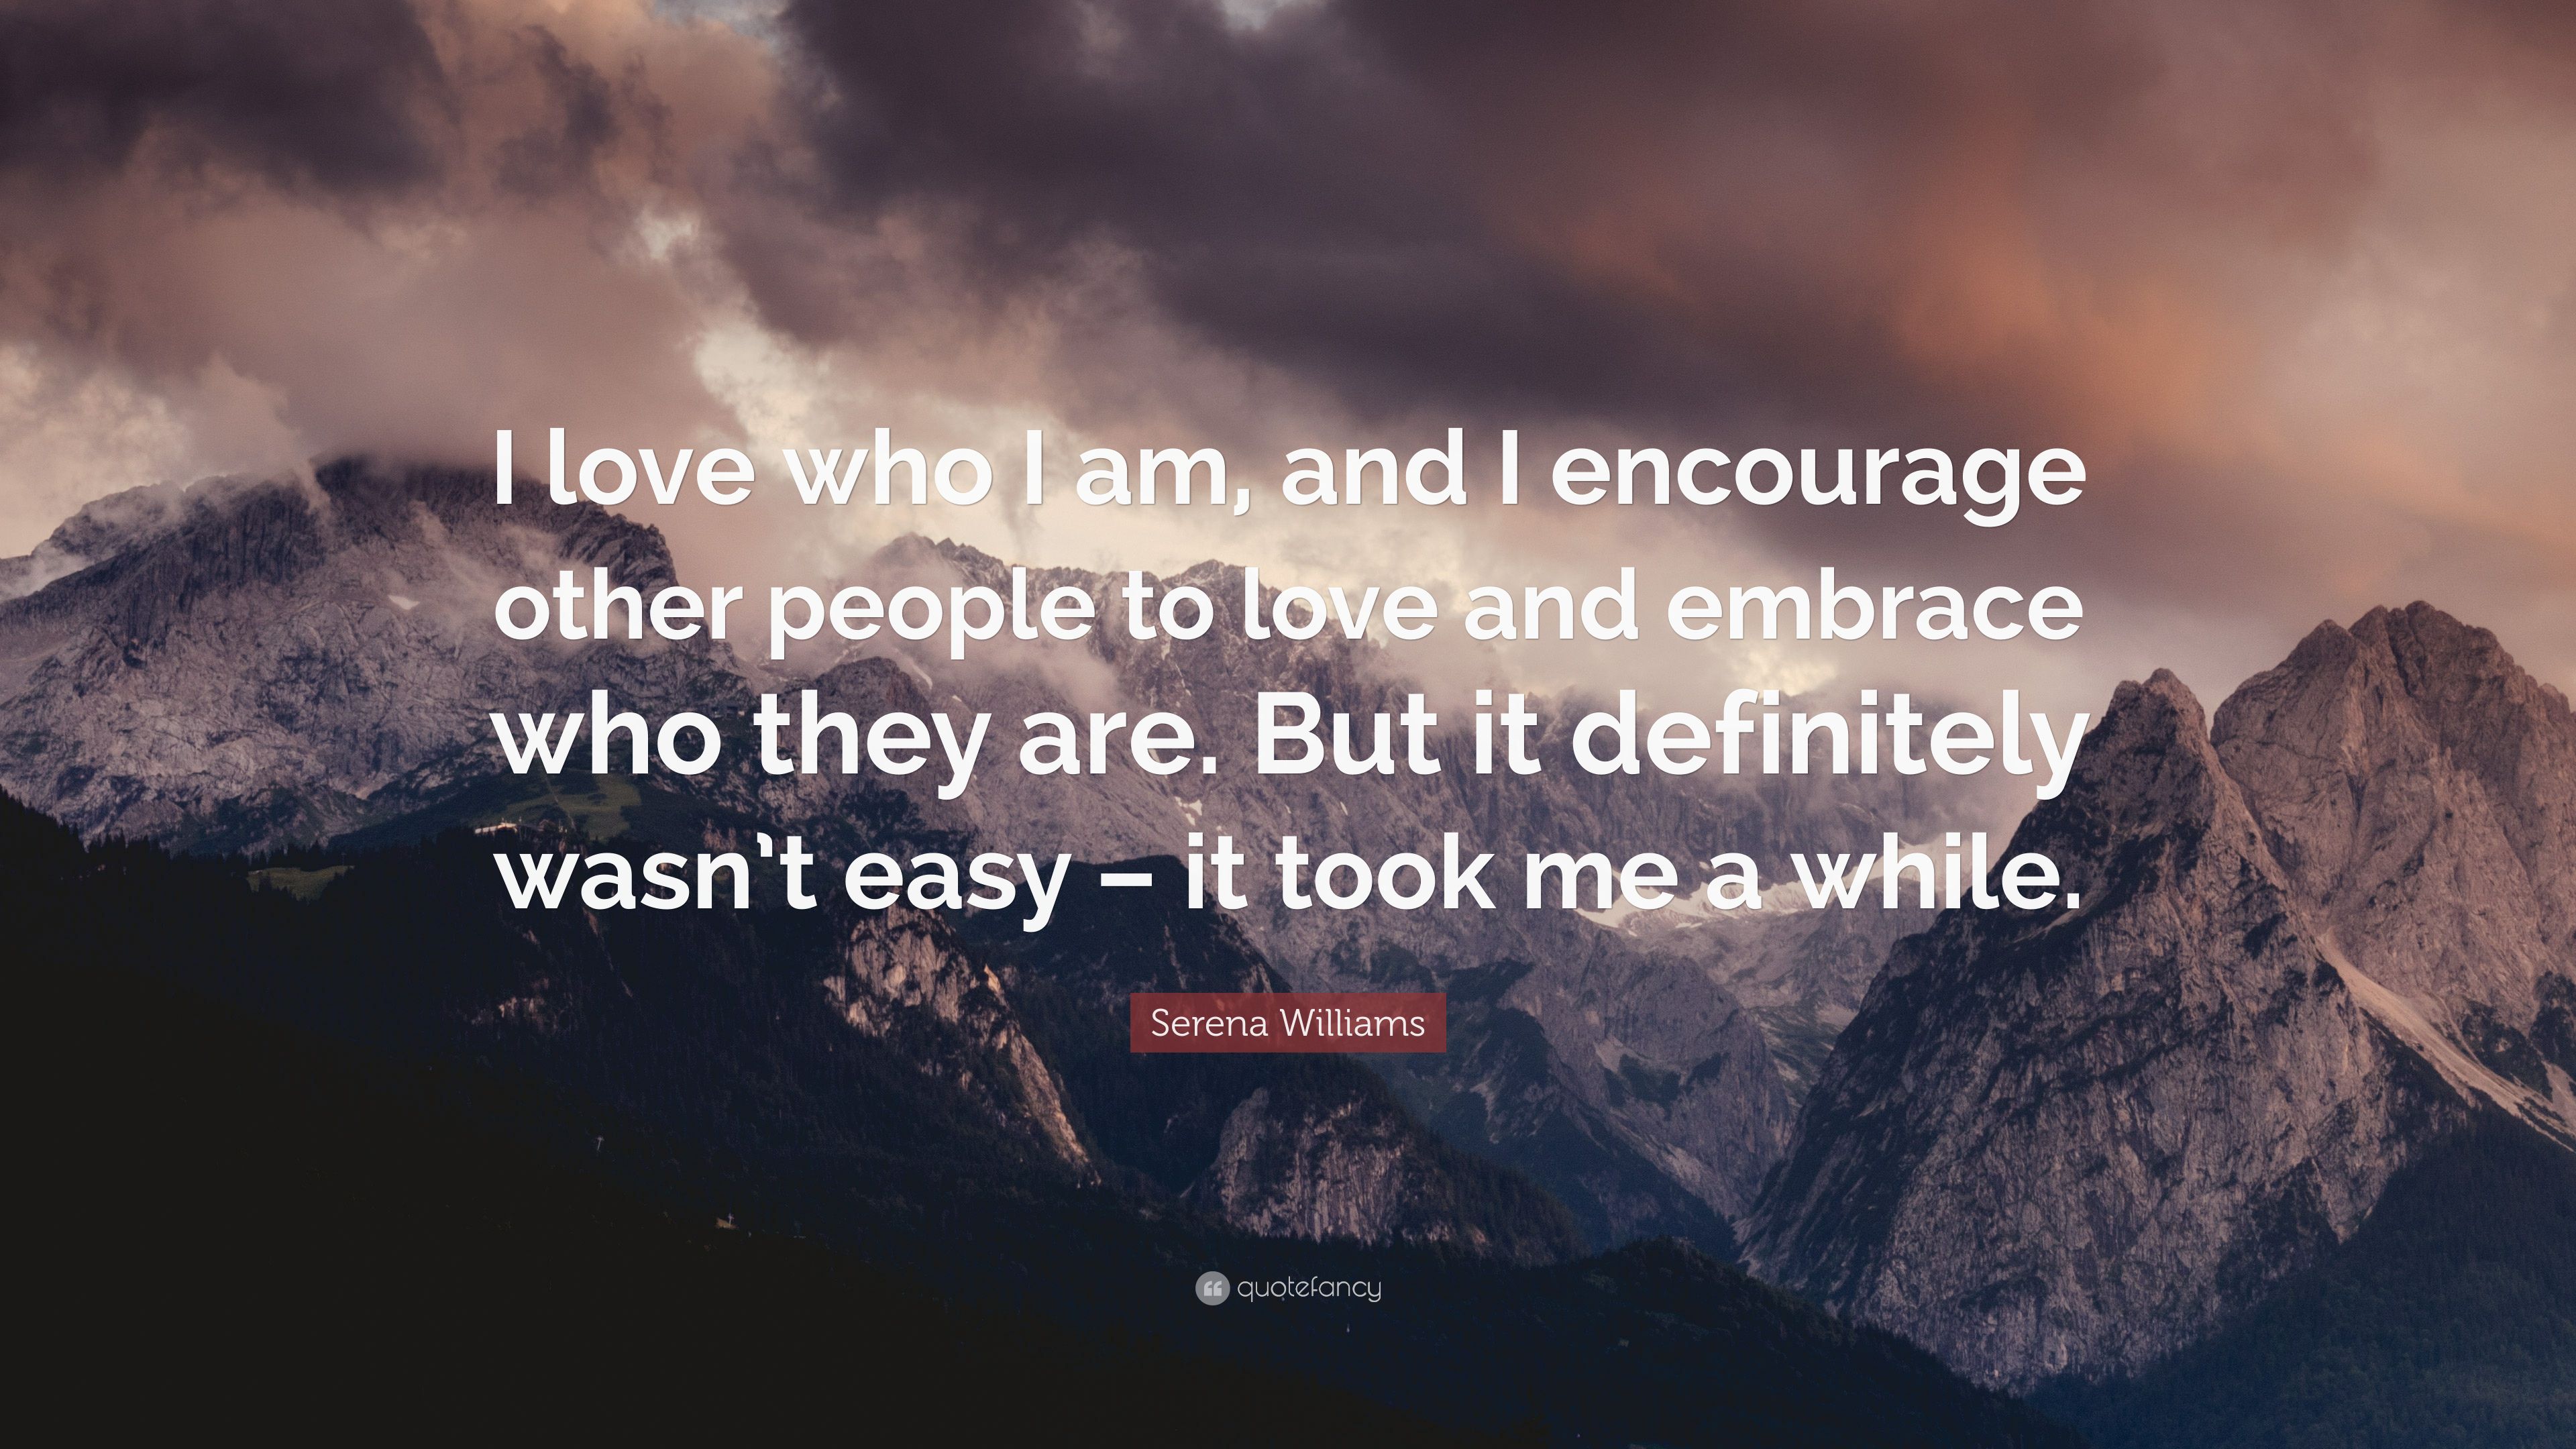 Serena Williams Quote: “I love who I am, and I encourage other